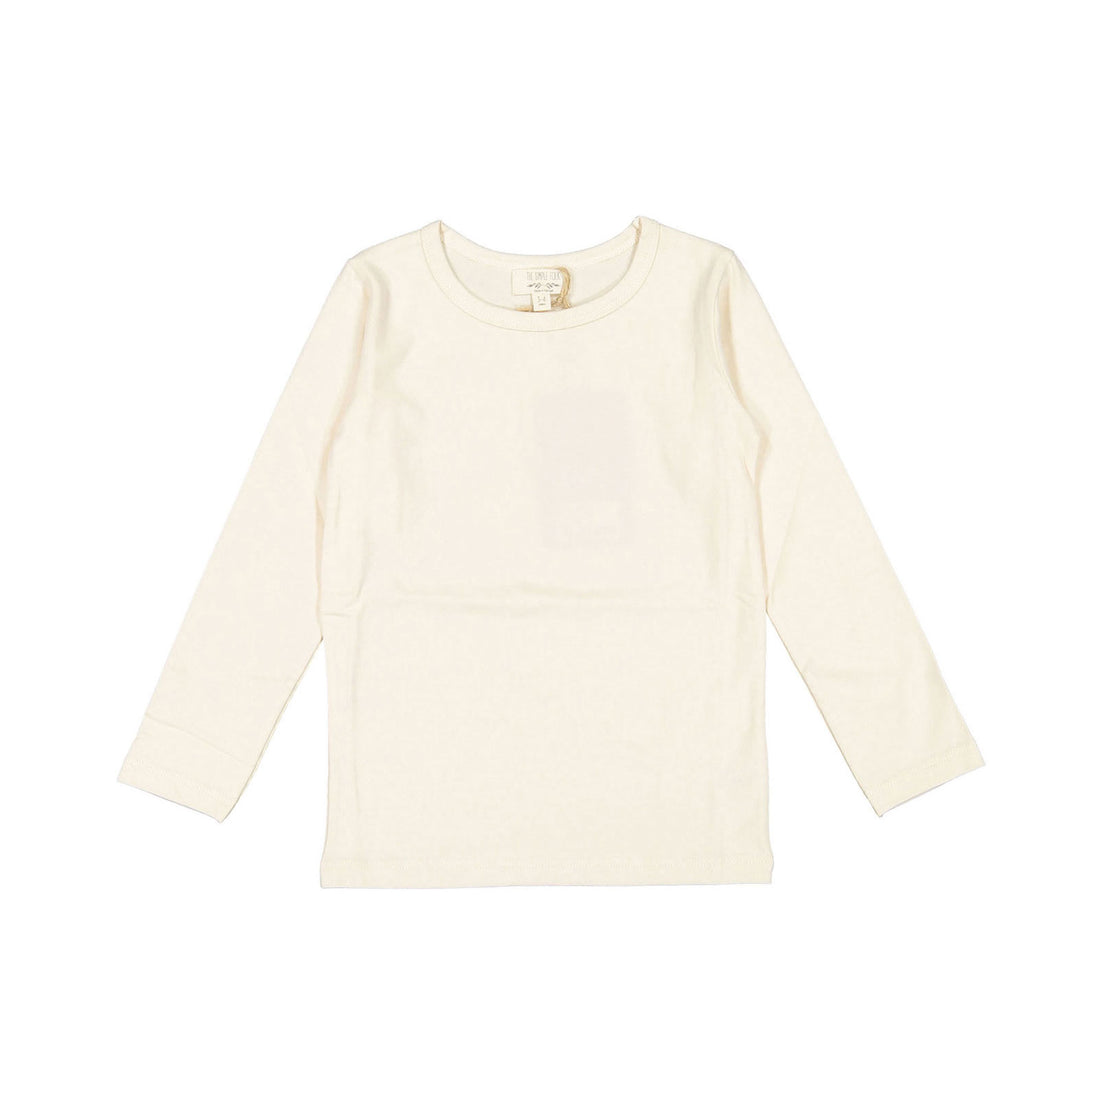 The Simple Folk The Everyday Top-Undyed